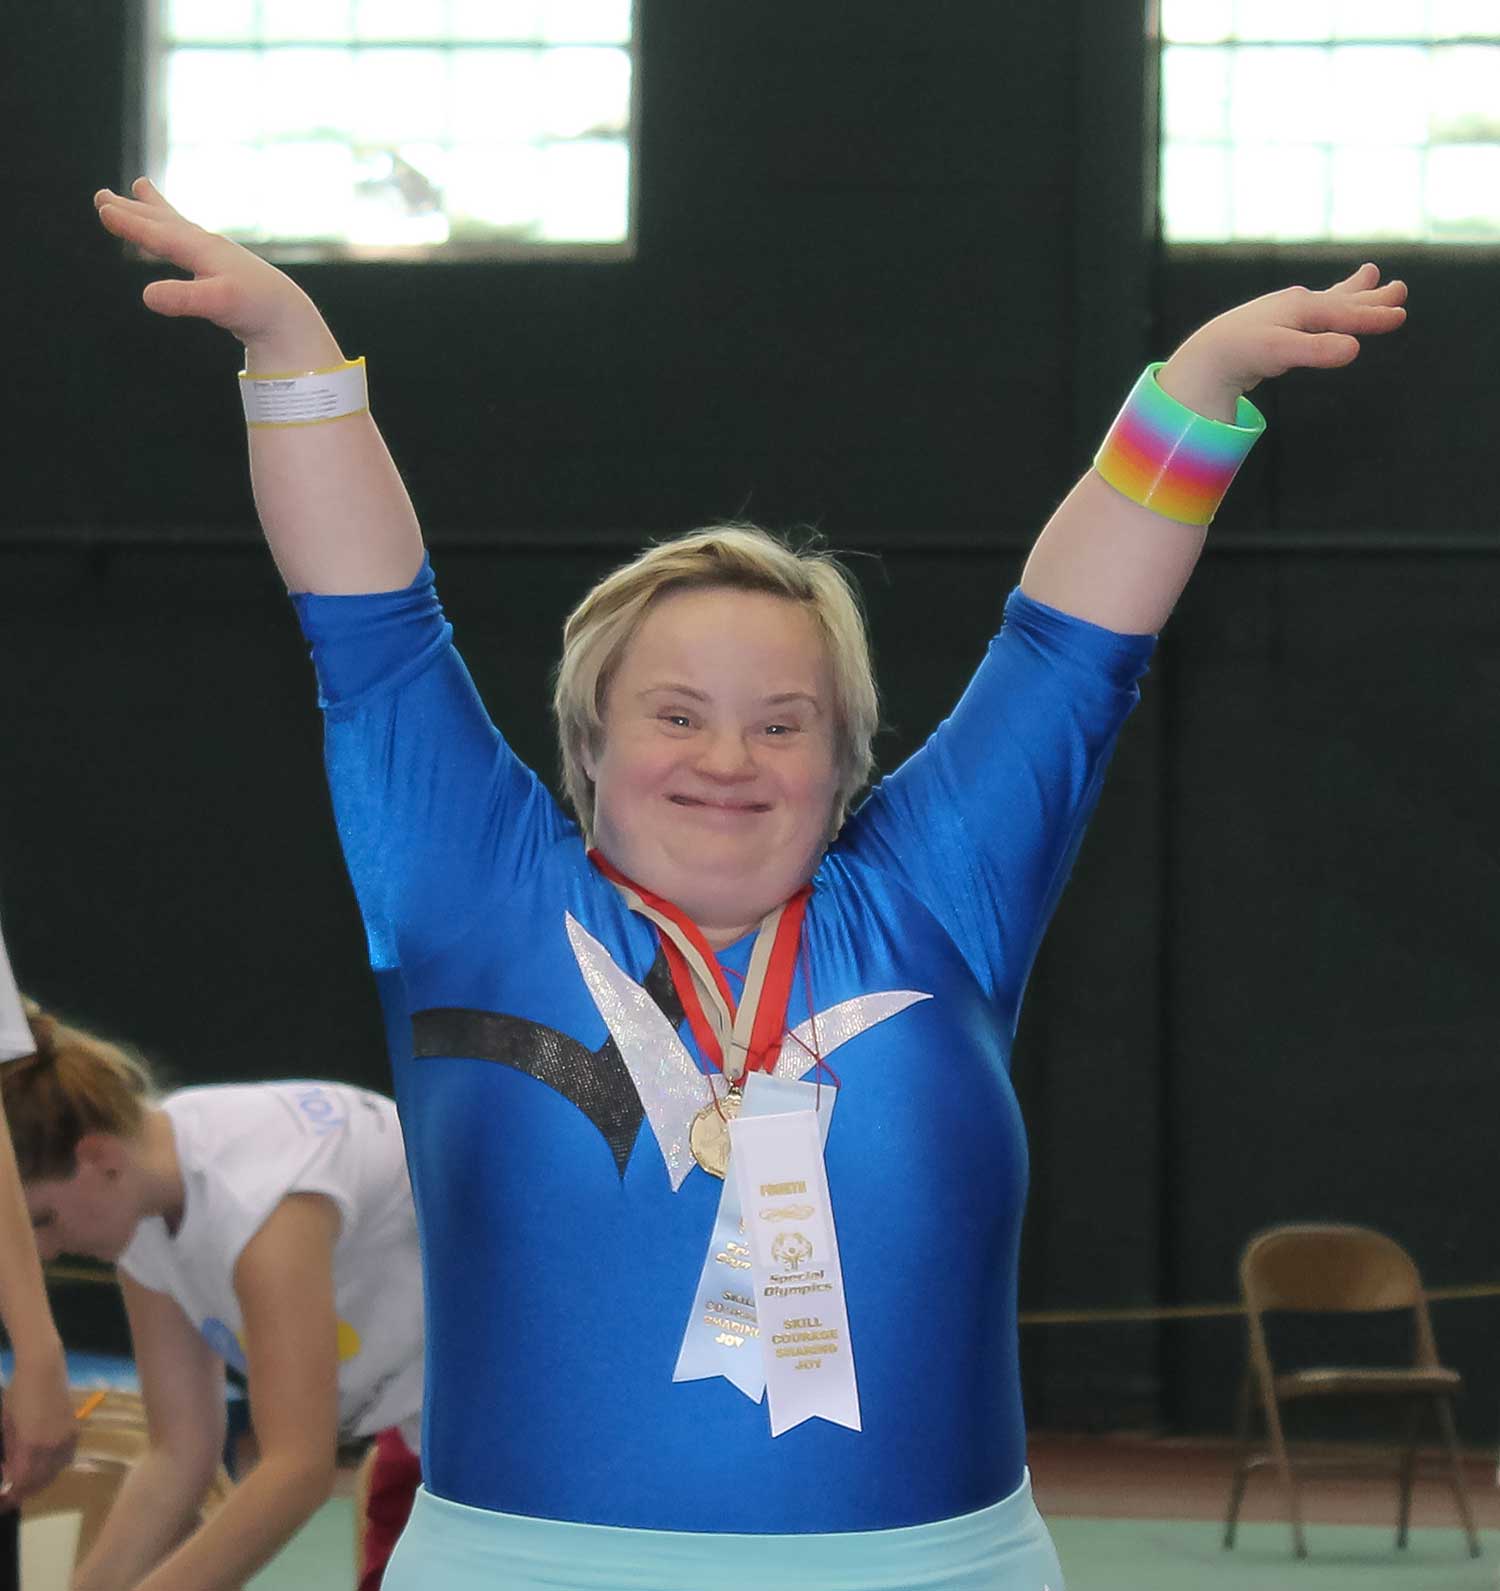 Special Olympics Gymnast with Medals